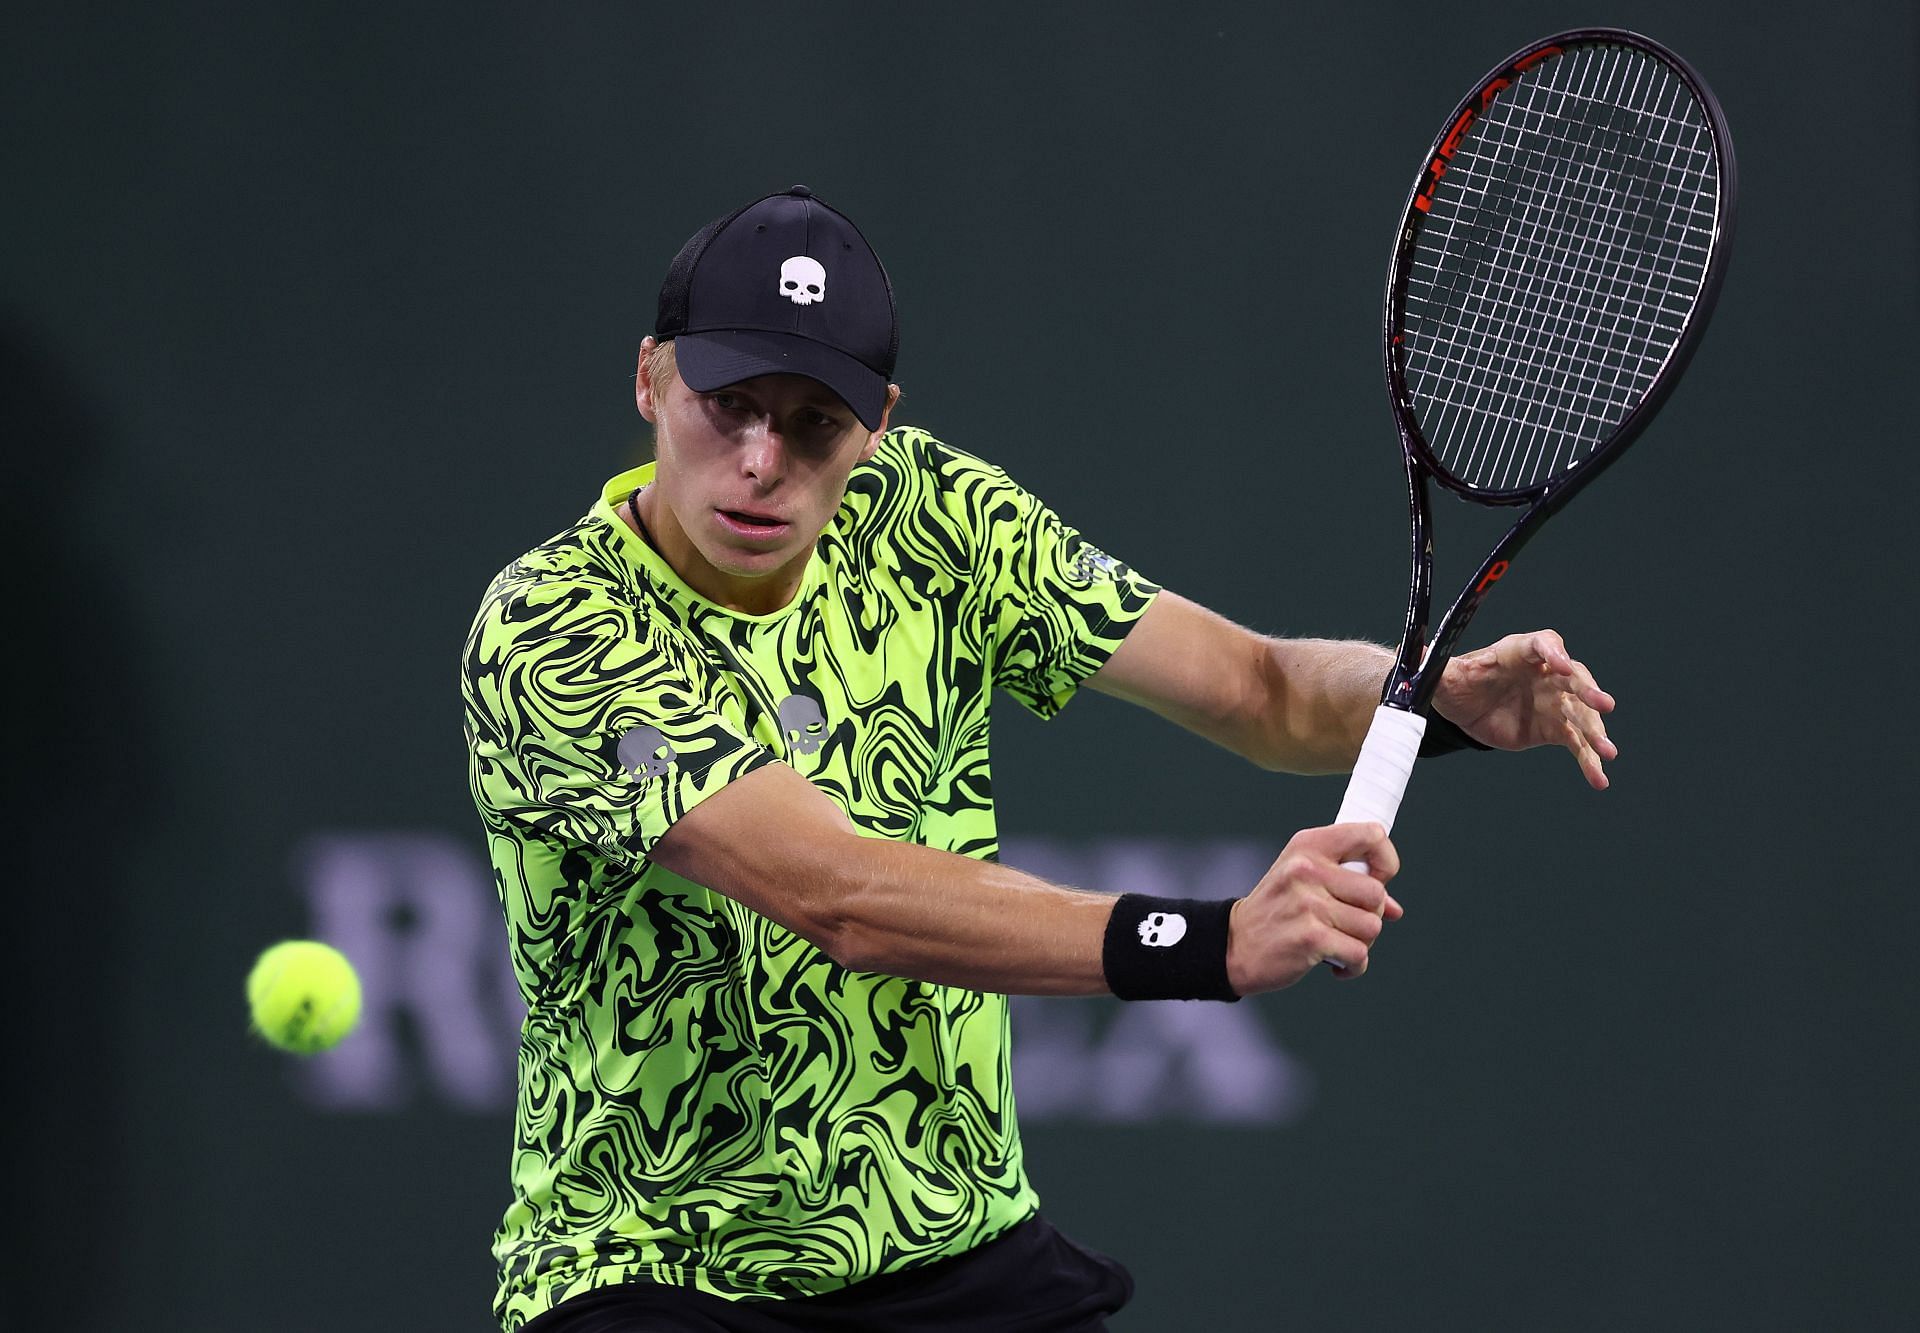 Ivashka is looking to reach the Miami third round.